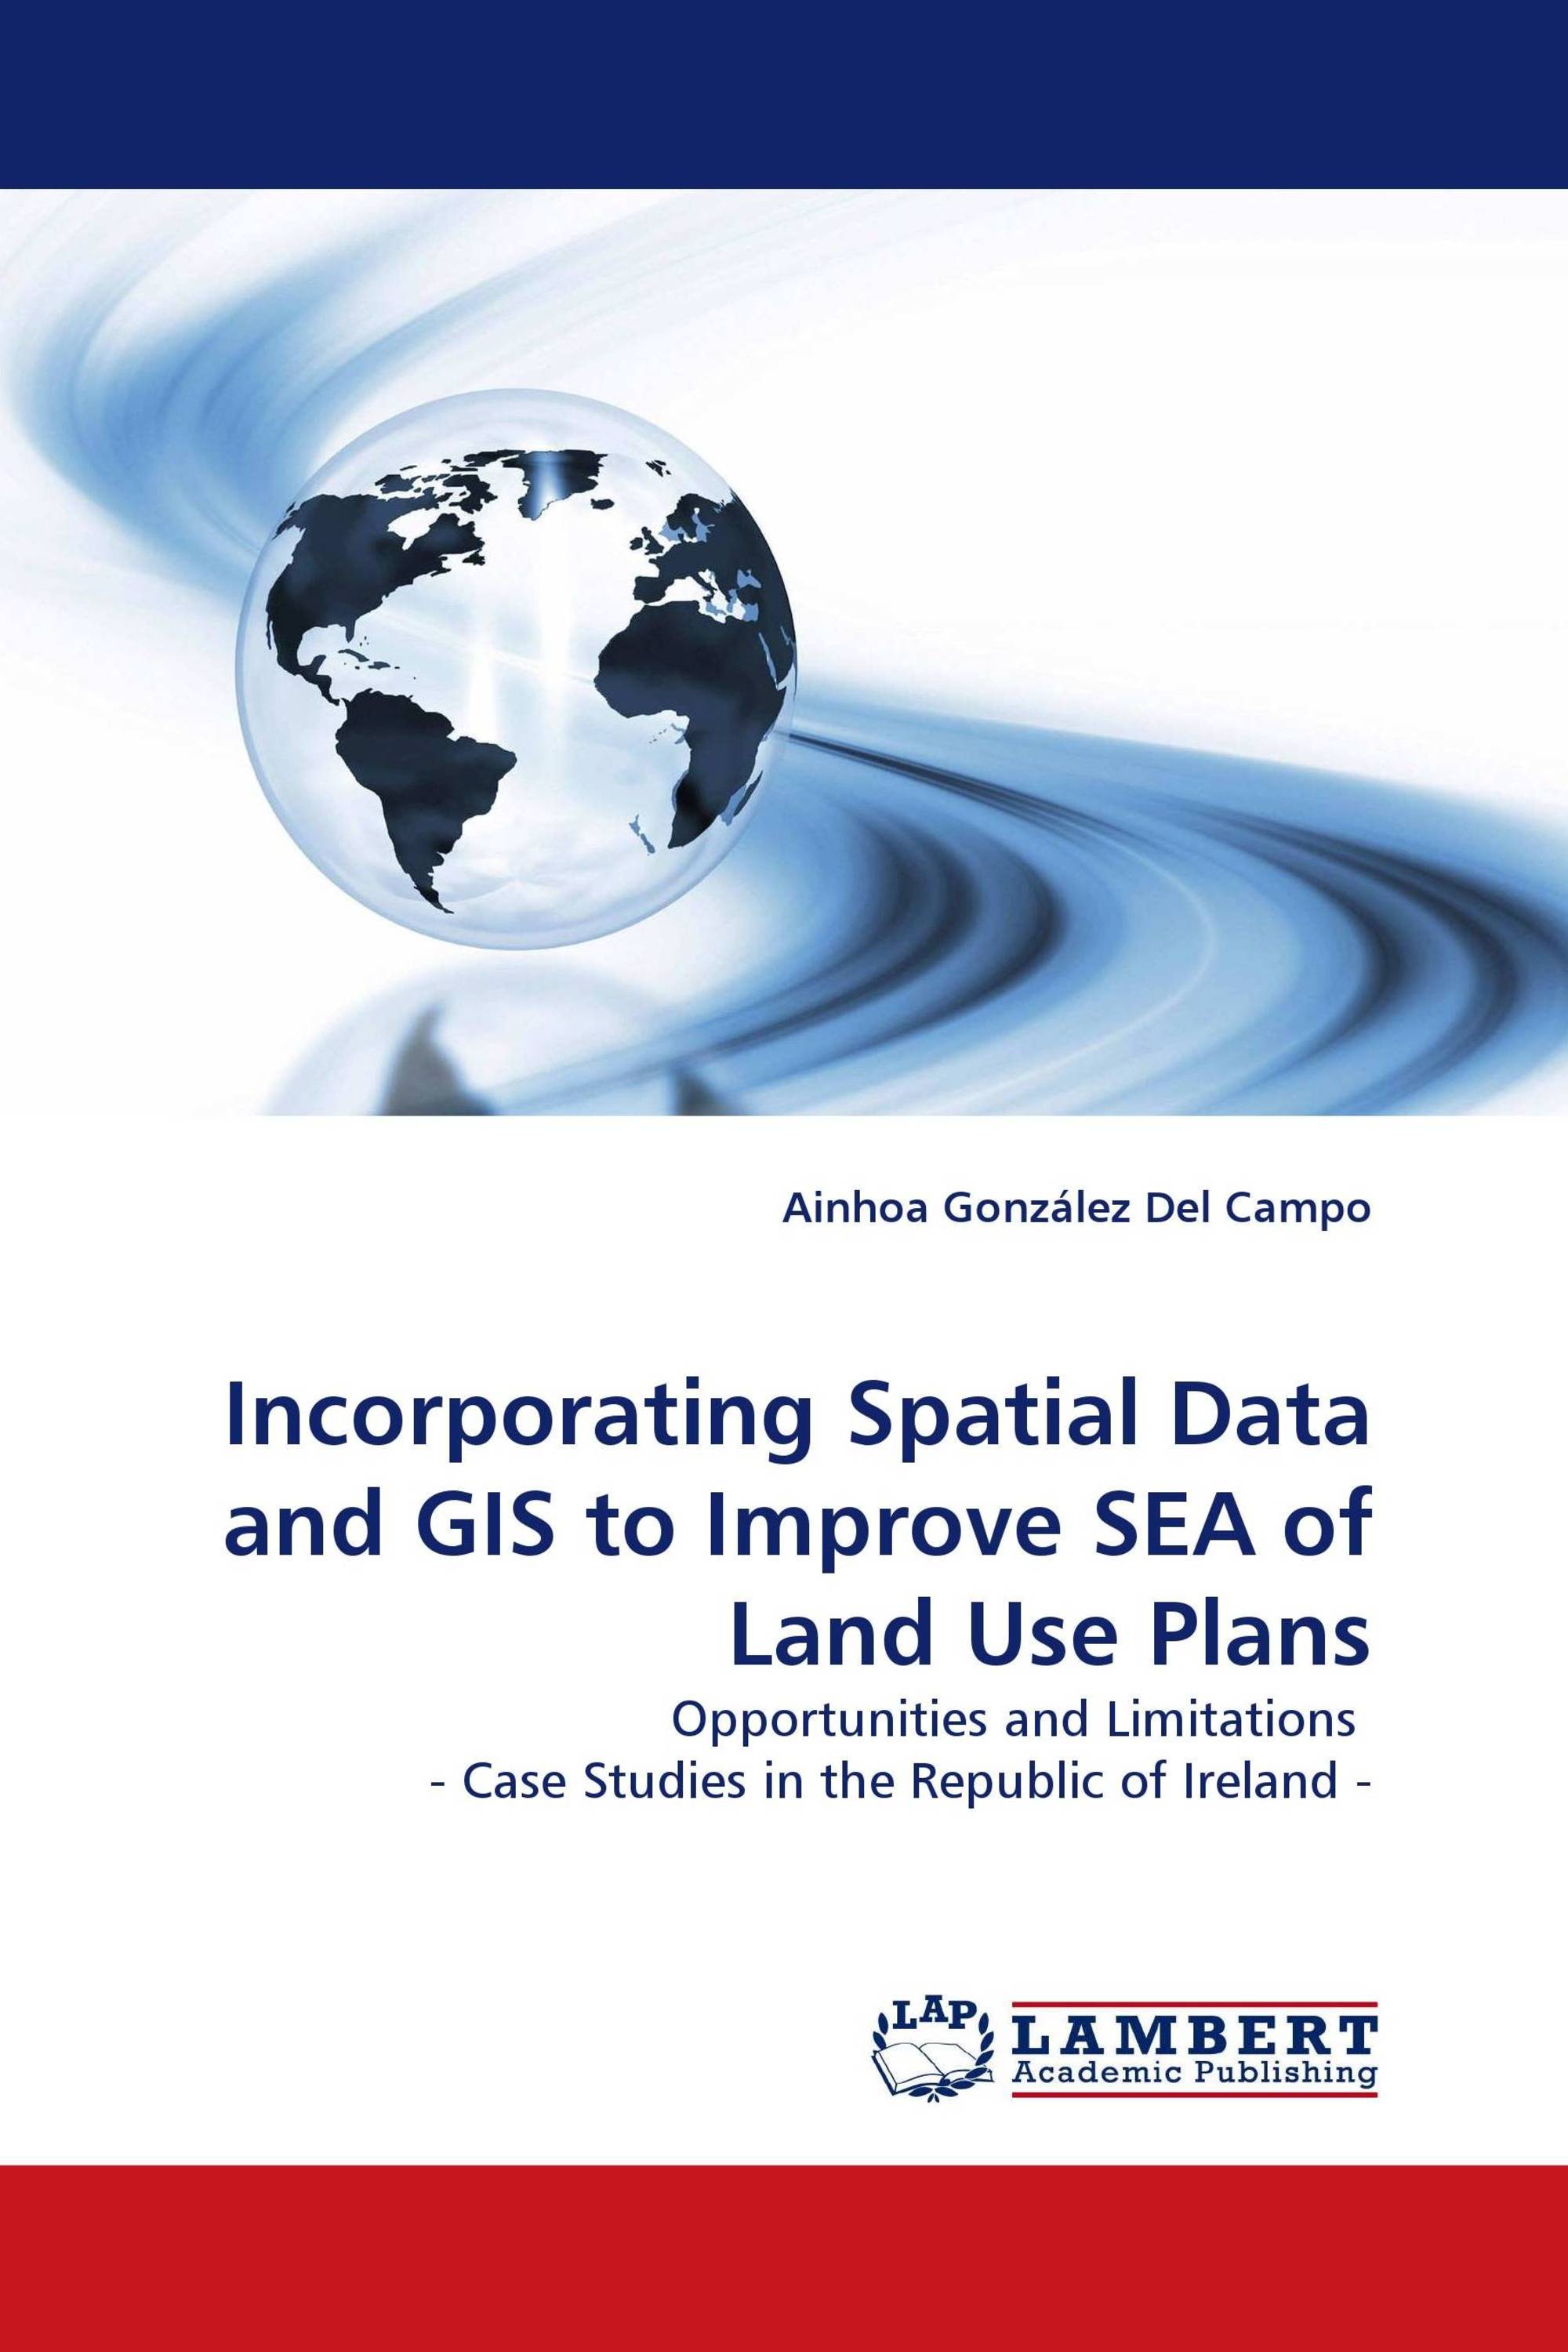 Incorporating Spatial Data and GIS to Improve SEA of Land Use Plans